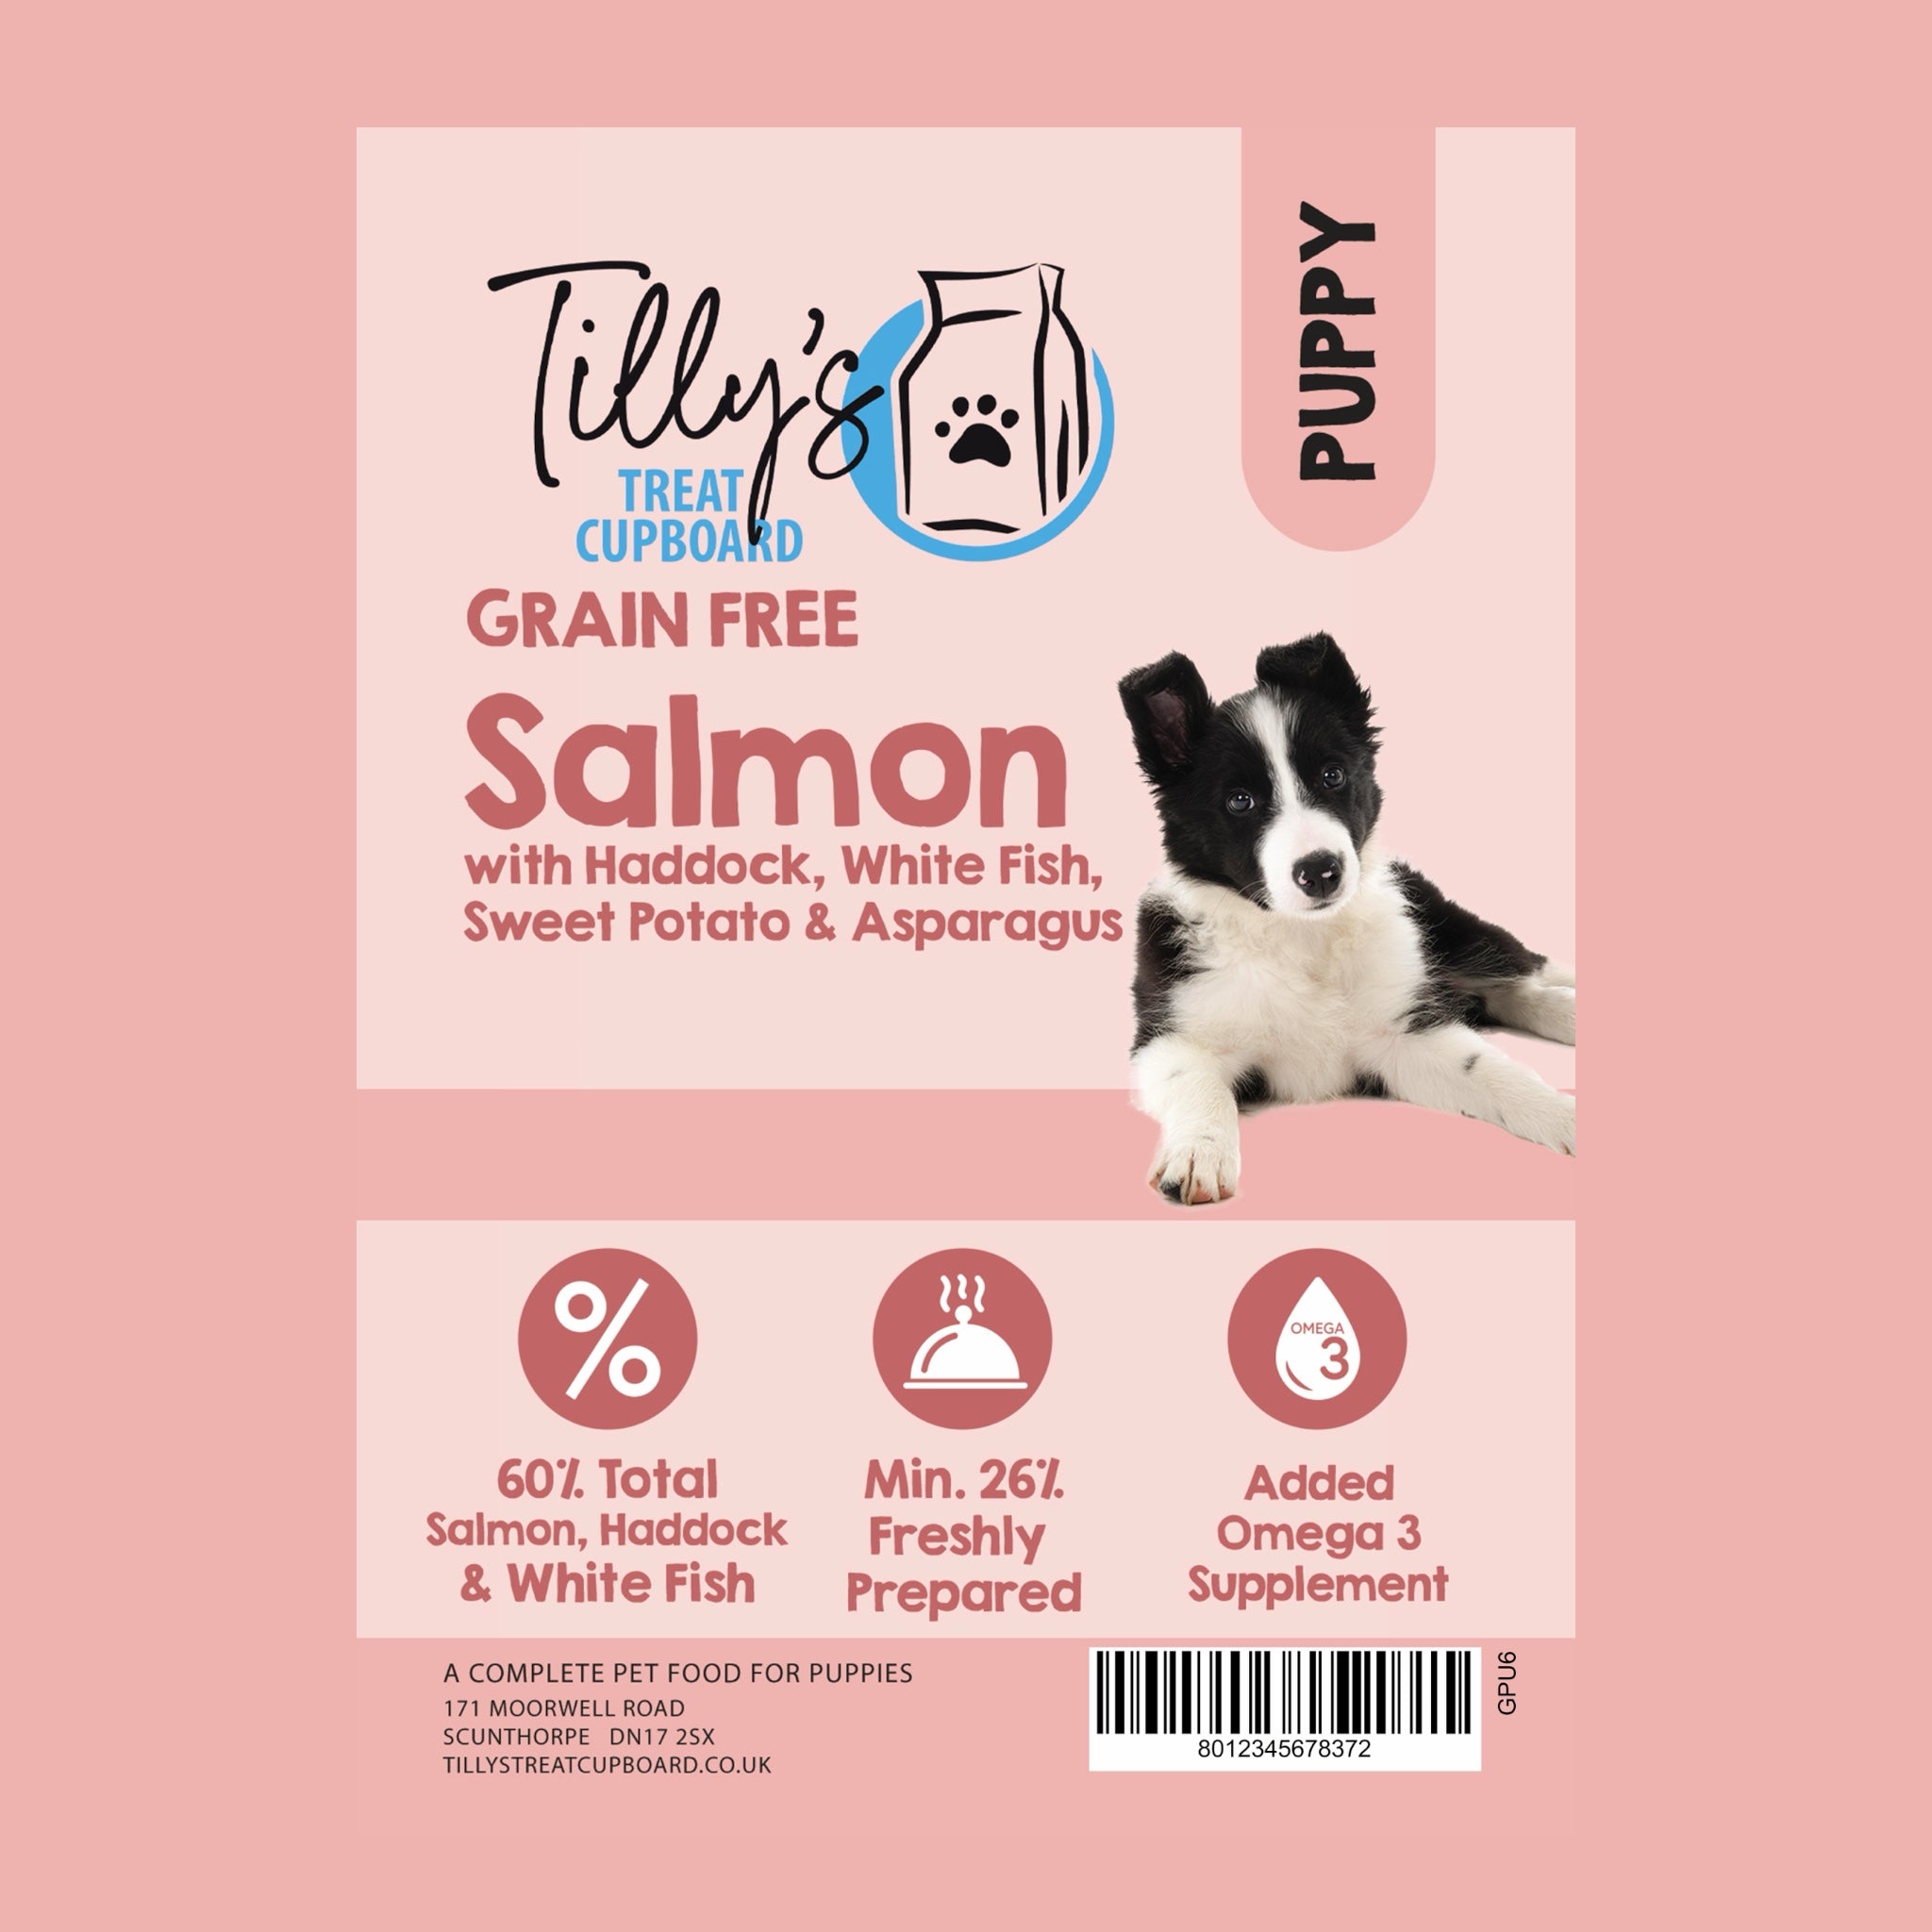 Tilly's Brown Bag PUPPY Salmon with Haddock, White Fish, Sweet Potato & Asparagus